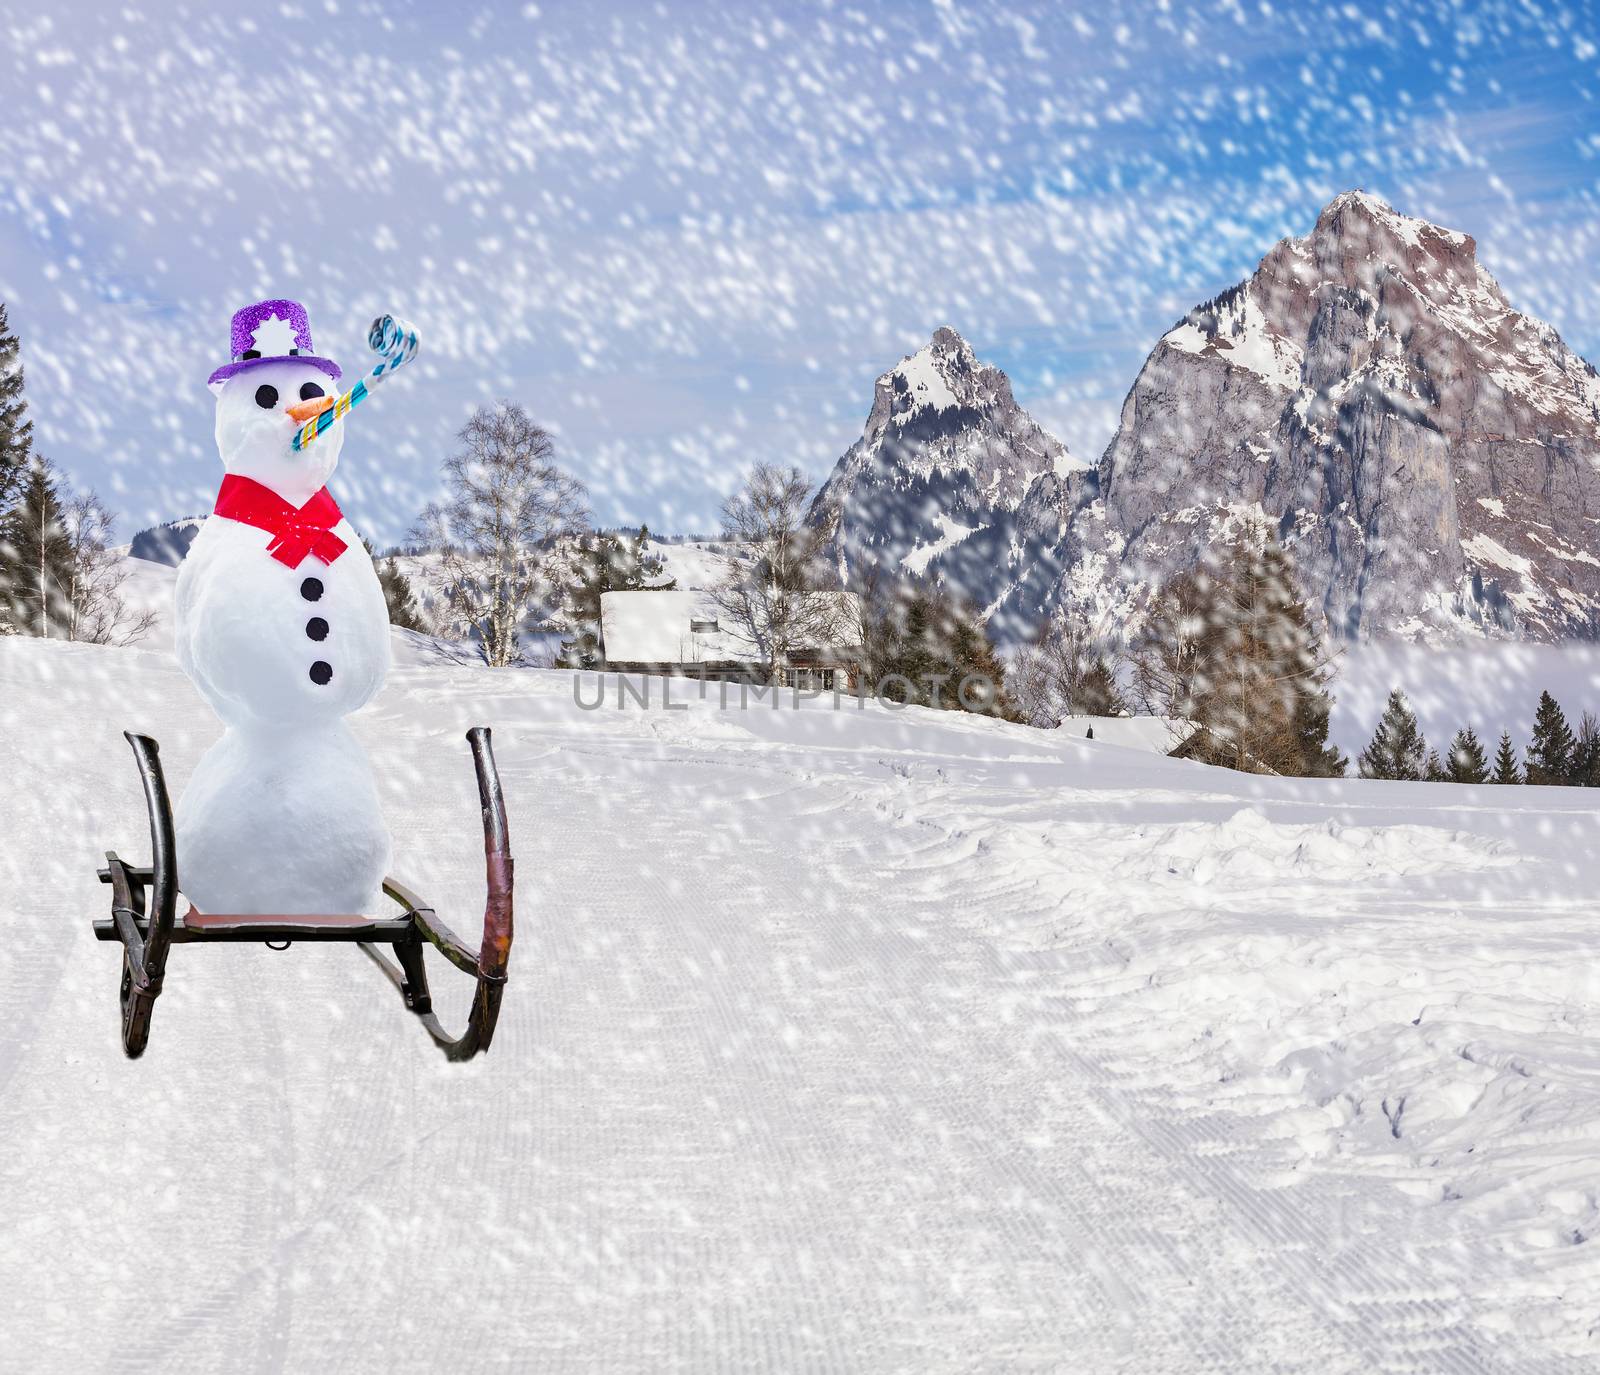 Merry christmas a funny party snowman sleighing down a ski hill slope on a sled in snowy weather by charlottebleijenberg